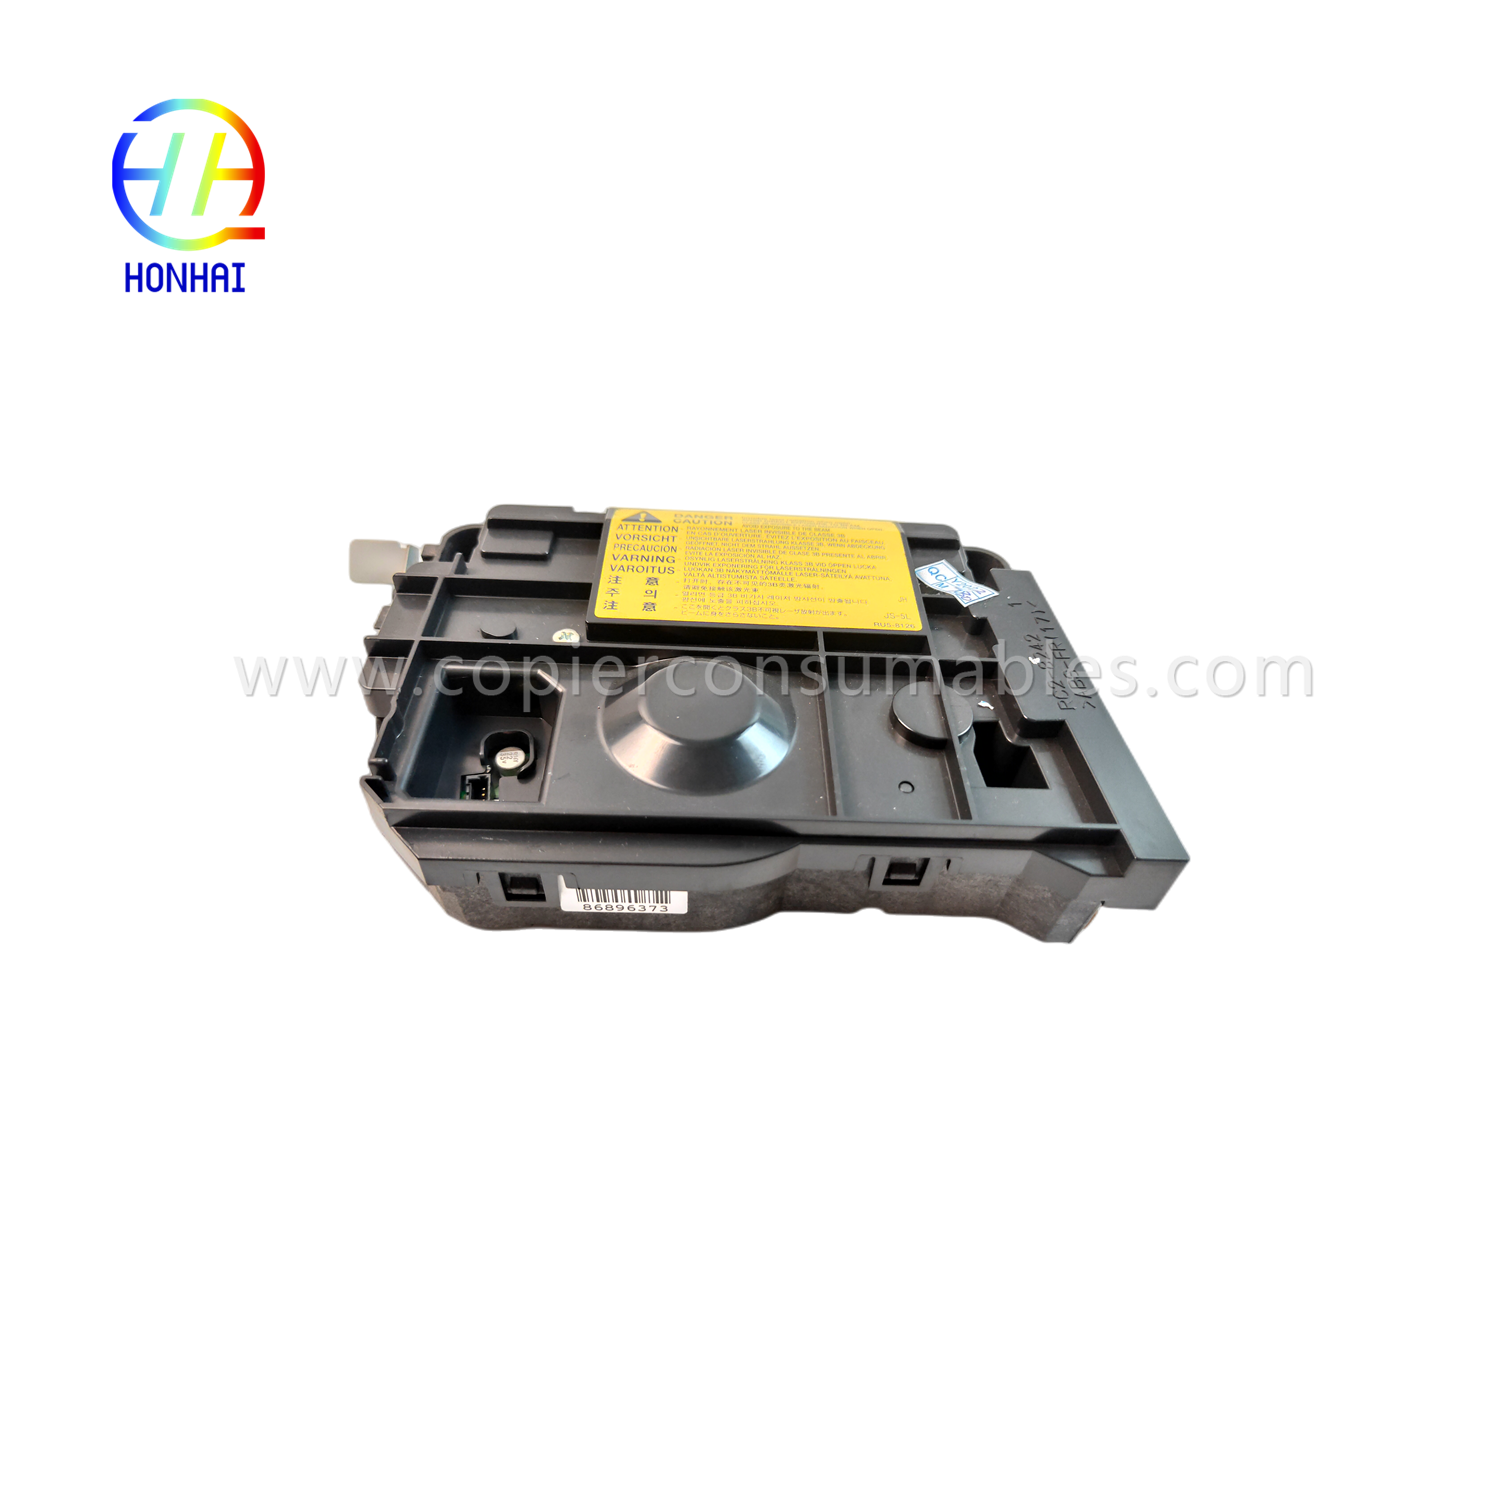 Laser Scanner for HP P2035 P2055 Series RM1-6382